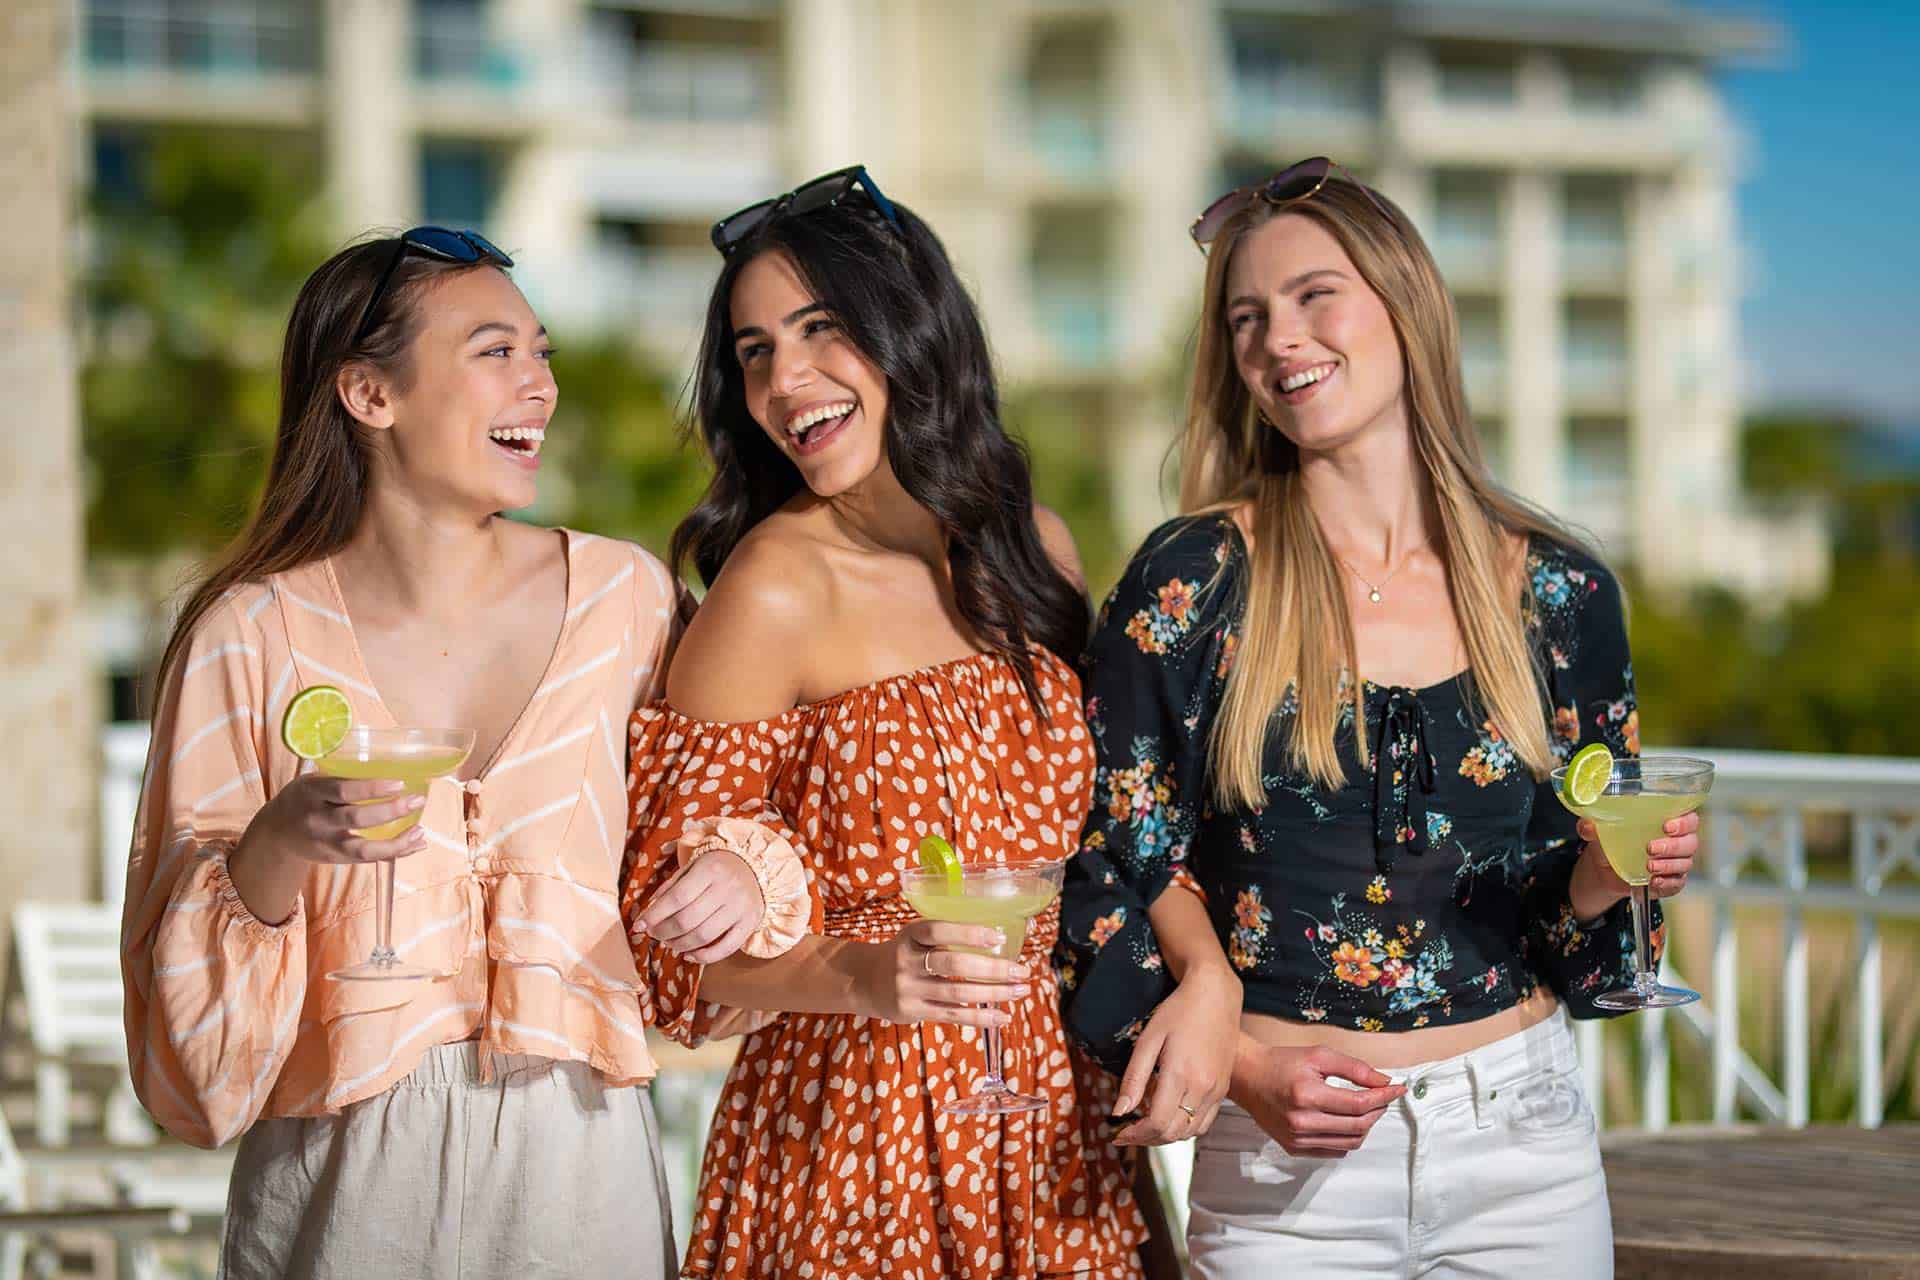 Group of woman laughing while holding margaritas